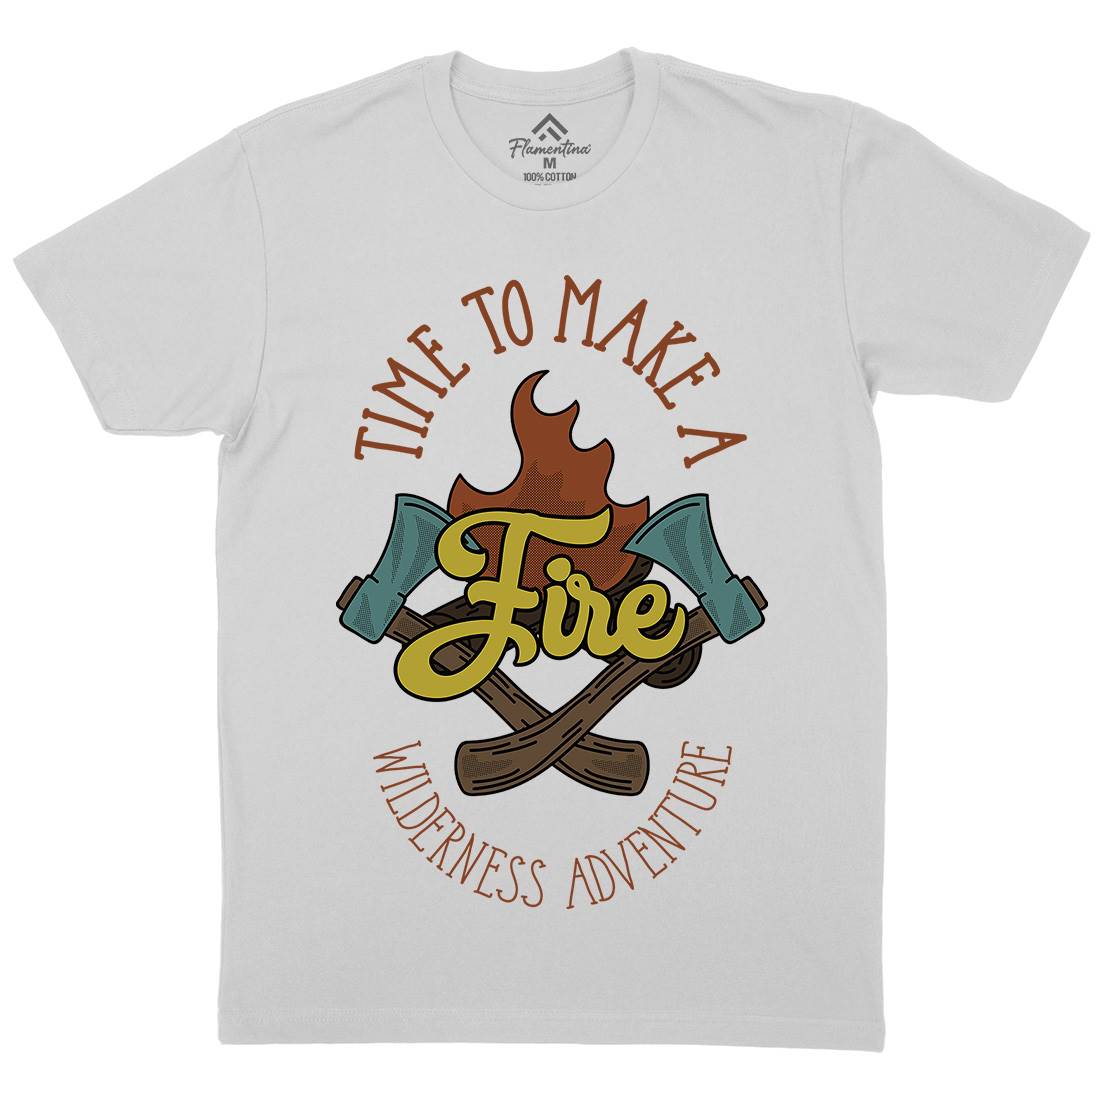 Time To Make Fire Mens Crew Neck T-Shirt Nature D992